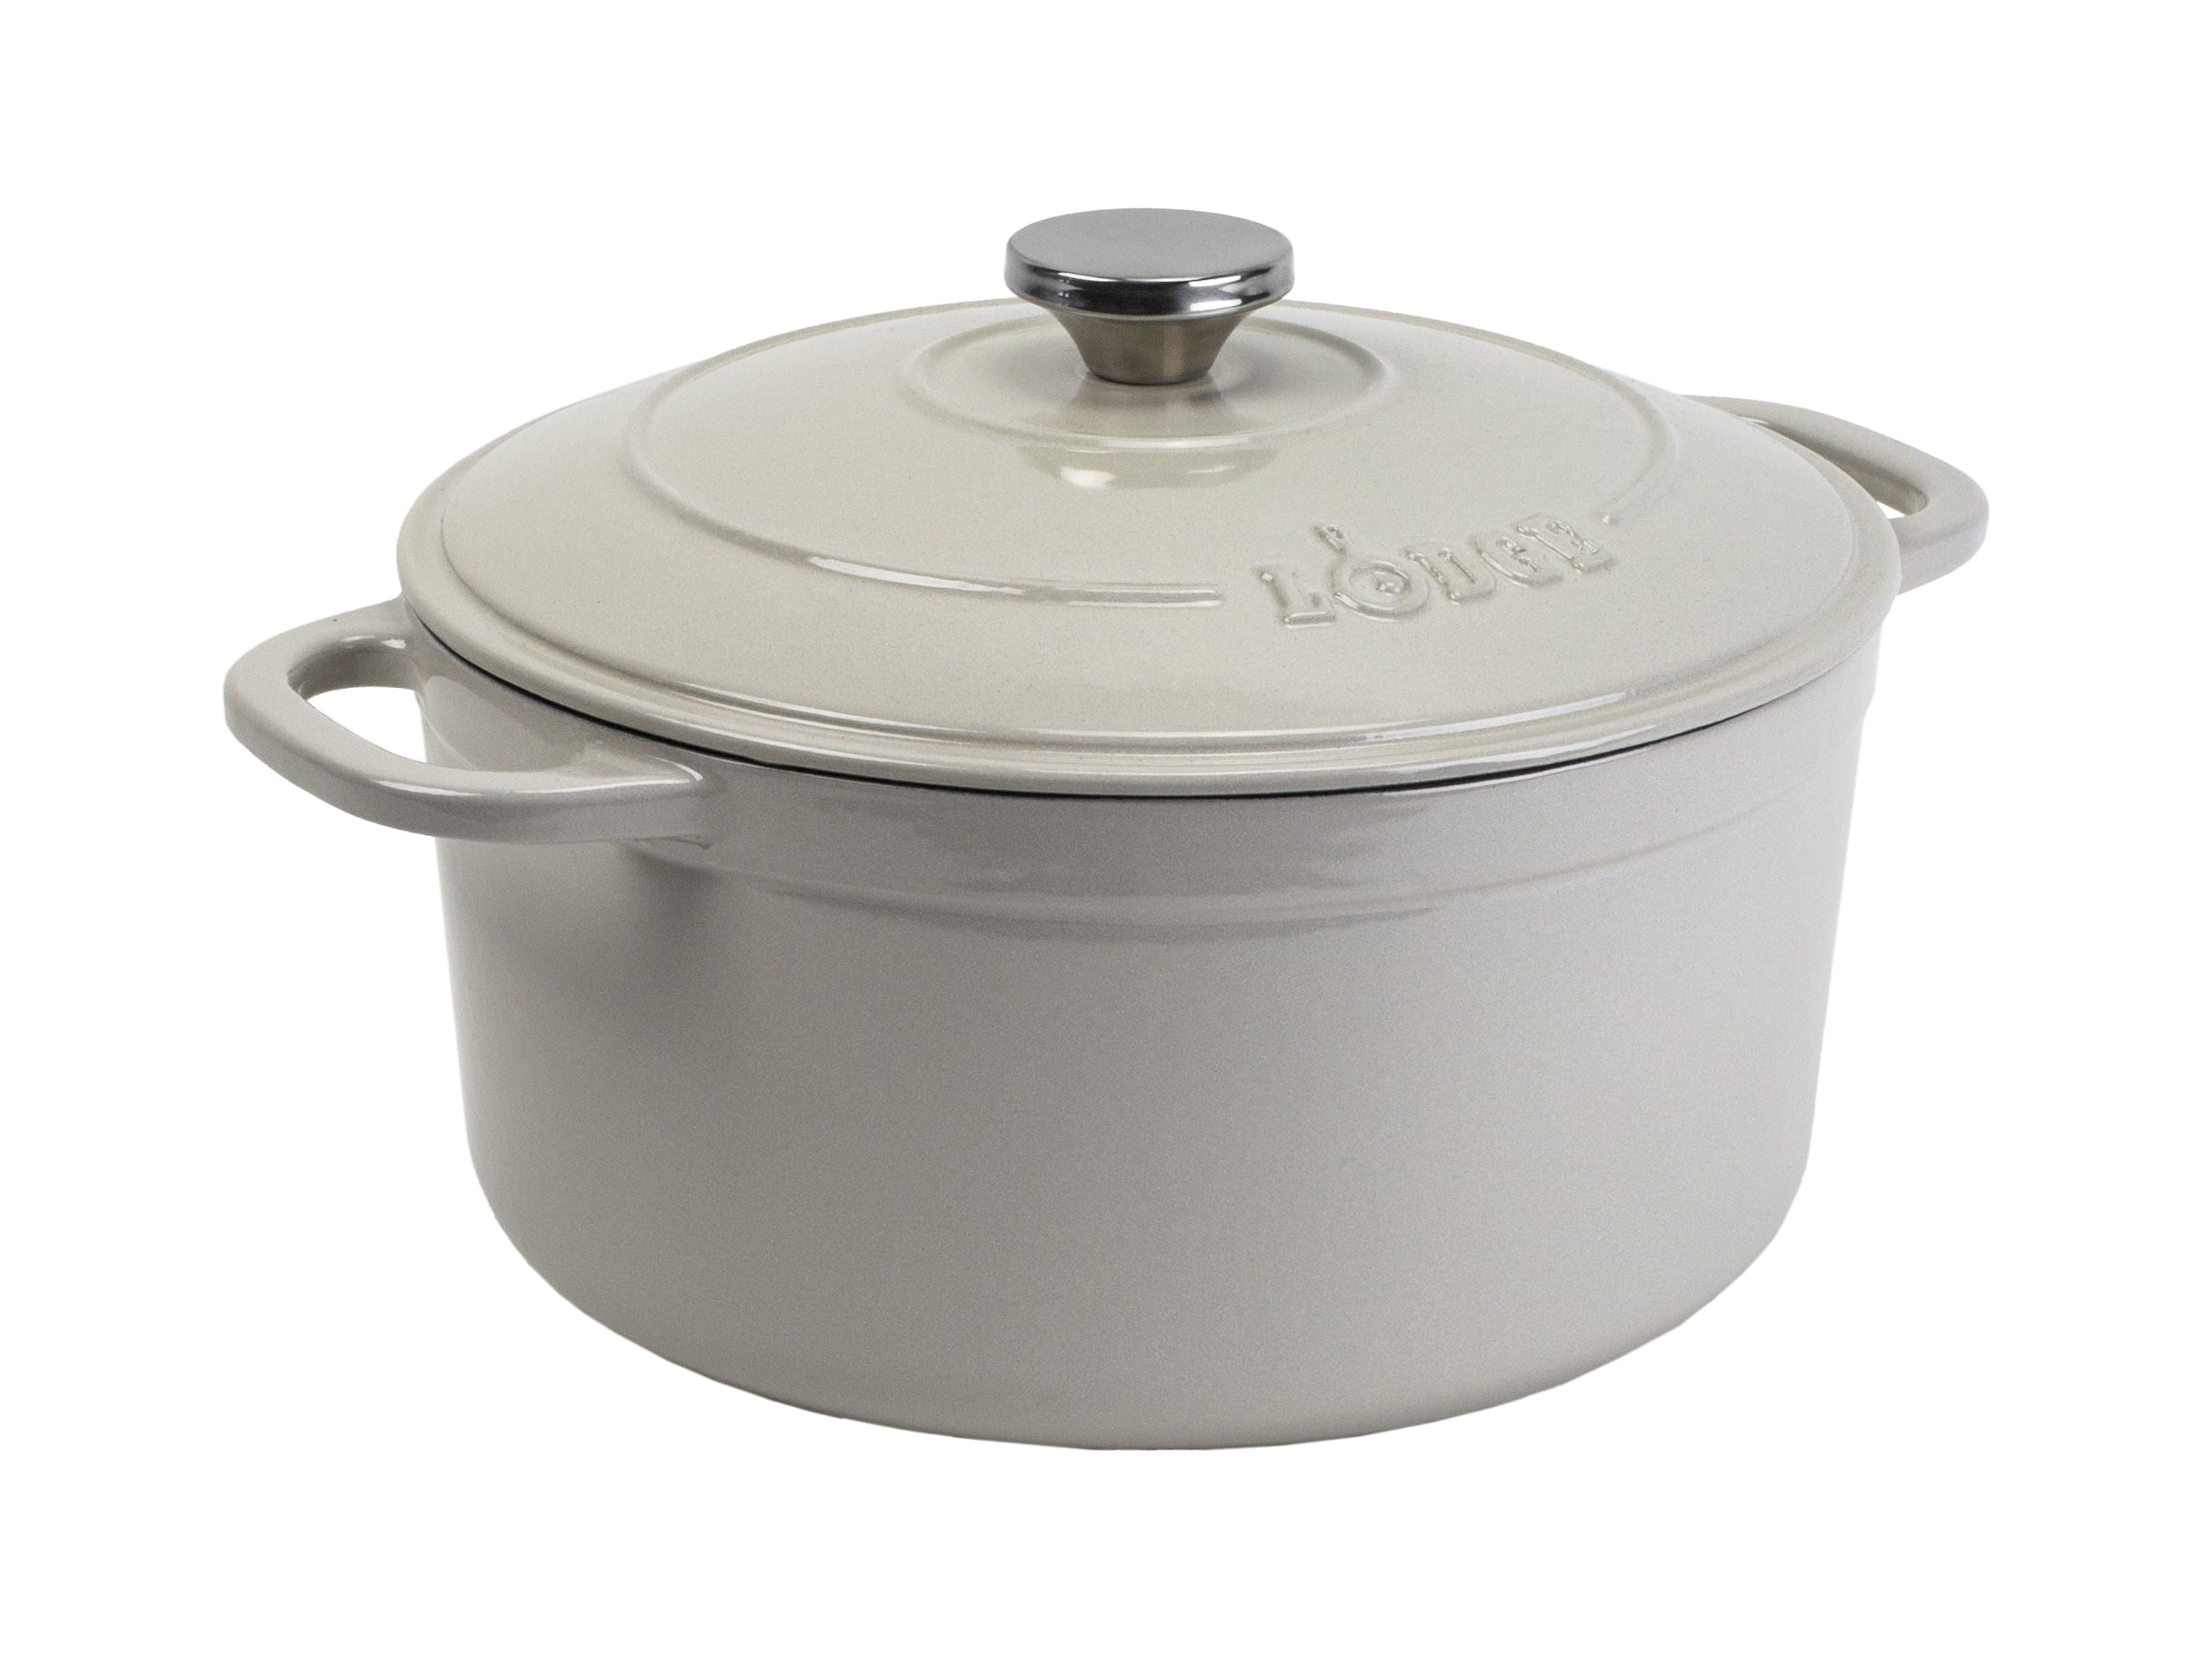 Lodge's 6.5-quart Dutch oven is a steal at $50 (Update: Sold out) - CNET